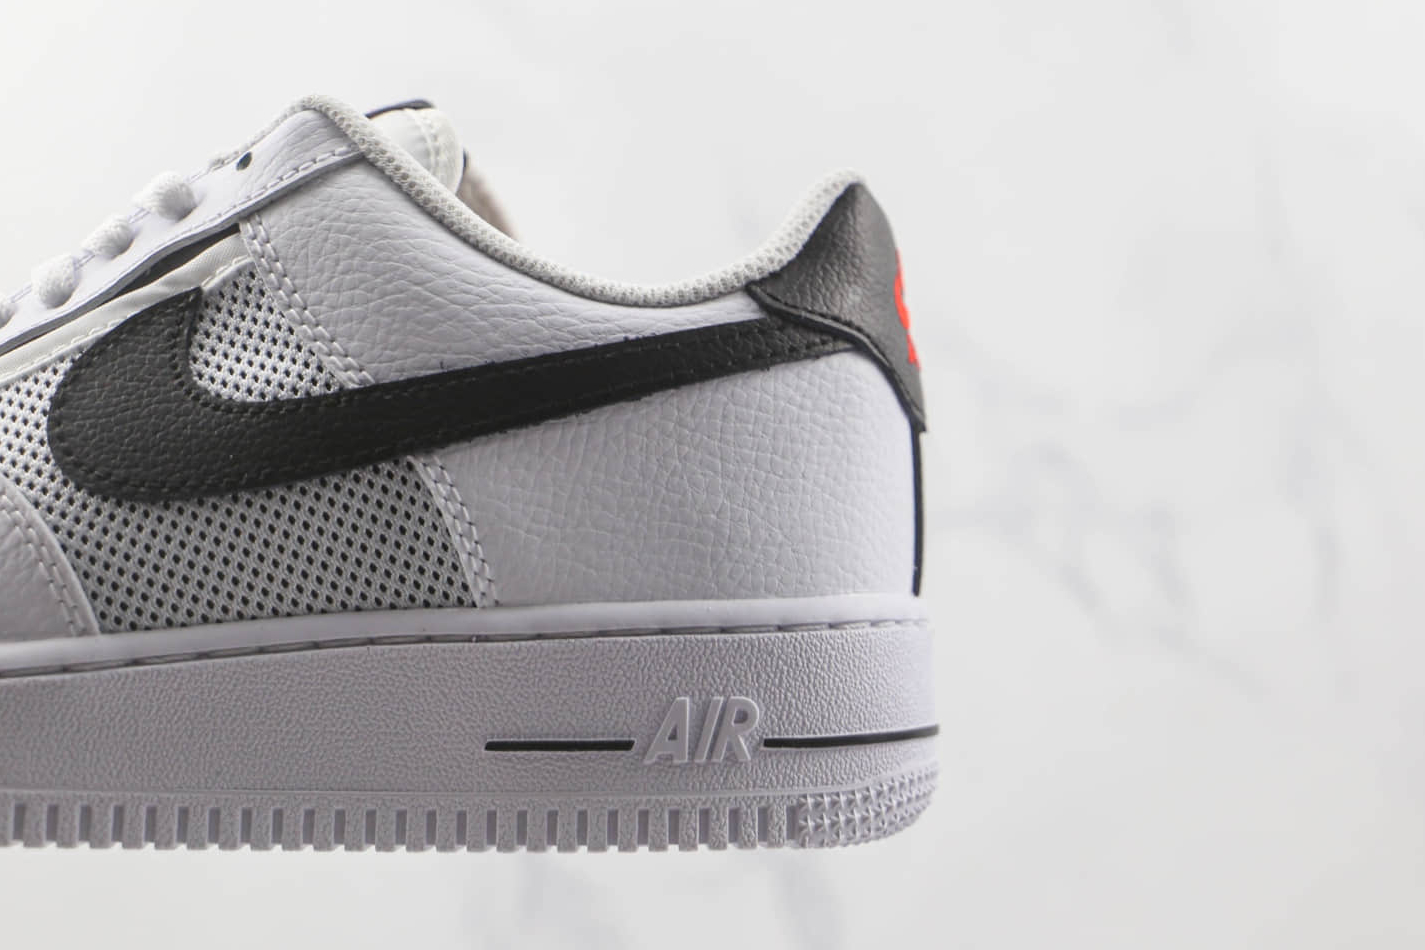 Nike Air Force 1 Low '07 LV8 'White Black' DH7567-100 | Stylish Sneakers